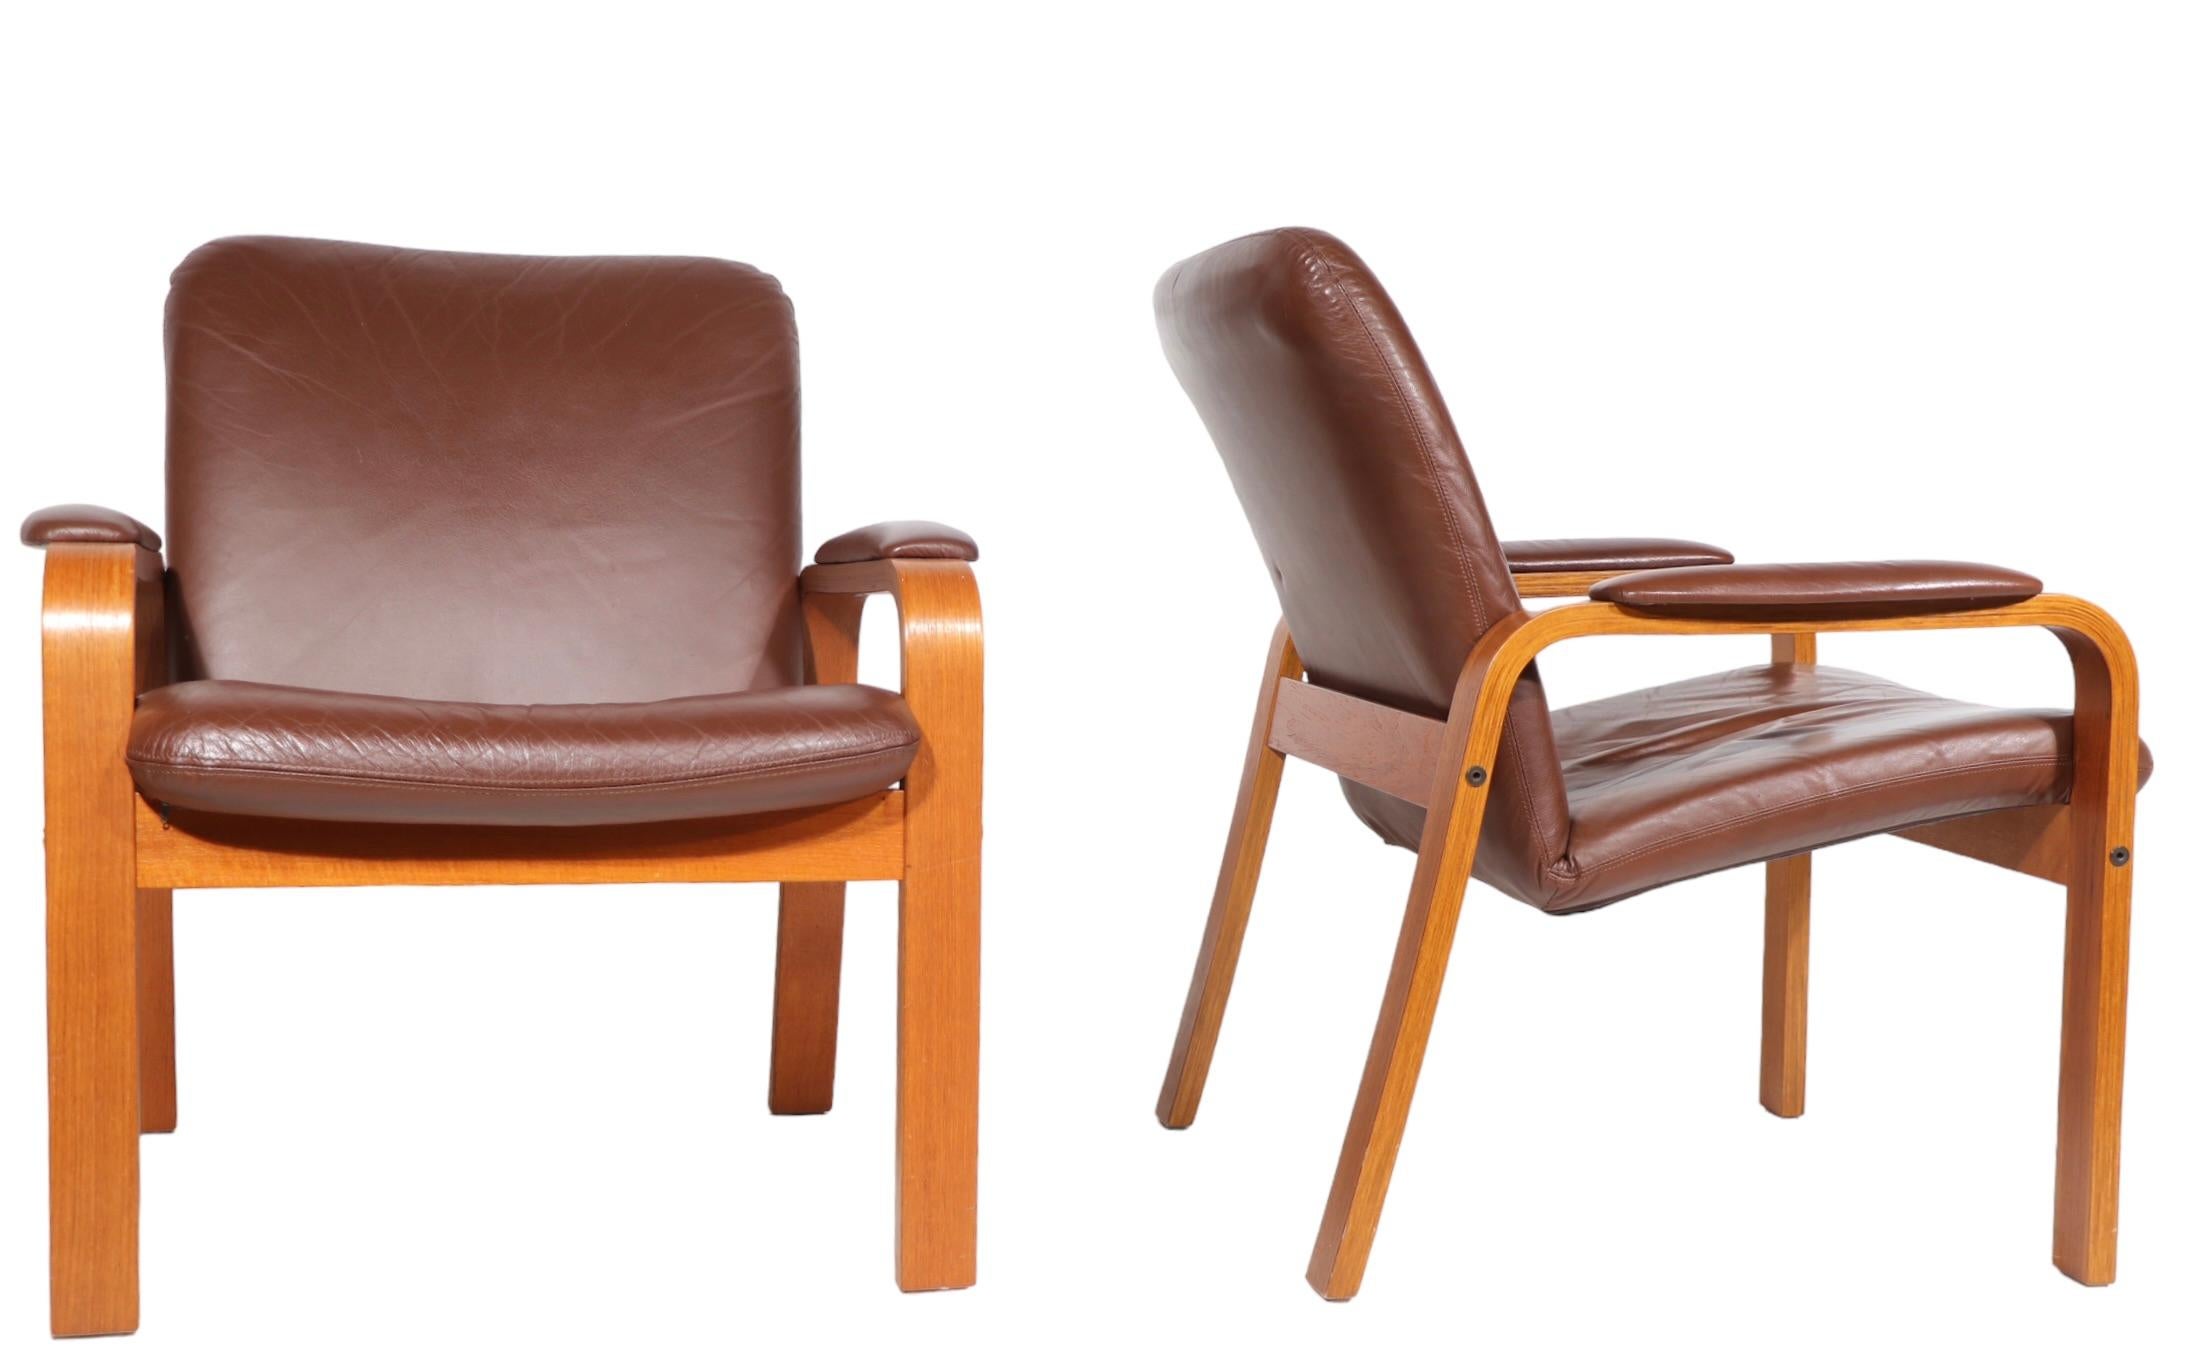 Pr. Scandinavian Mid Century Modern Lounge Arm Chairs Made in Norway by Ekorness For Sale 6